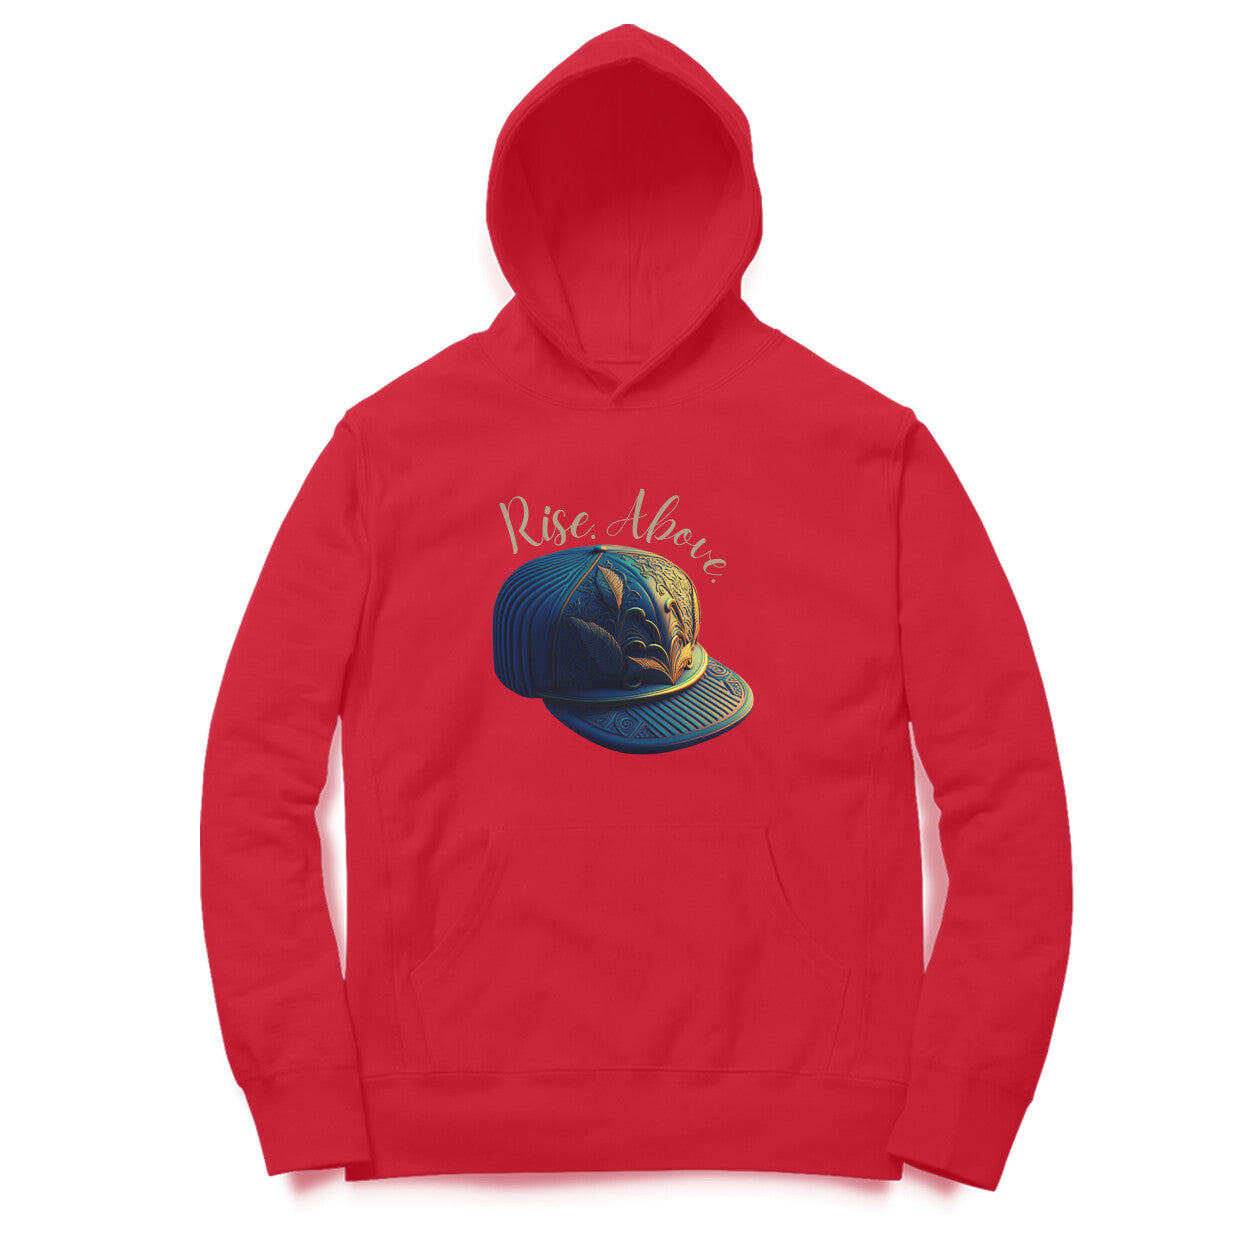 Rise above' hoodie